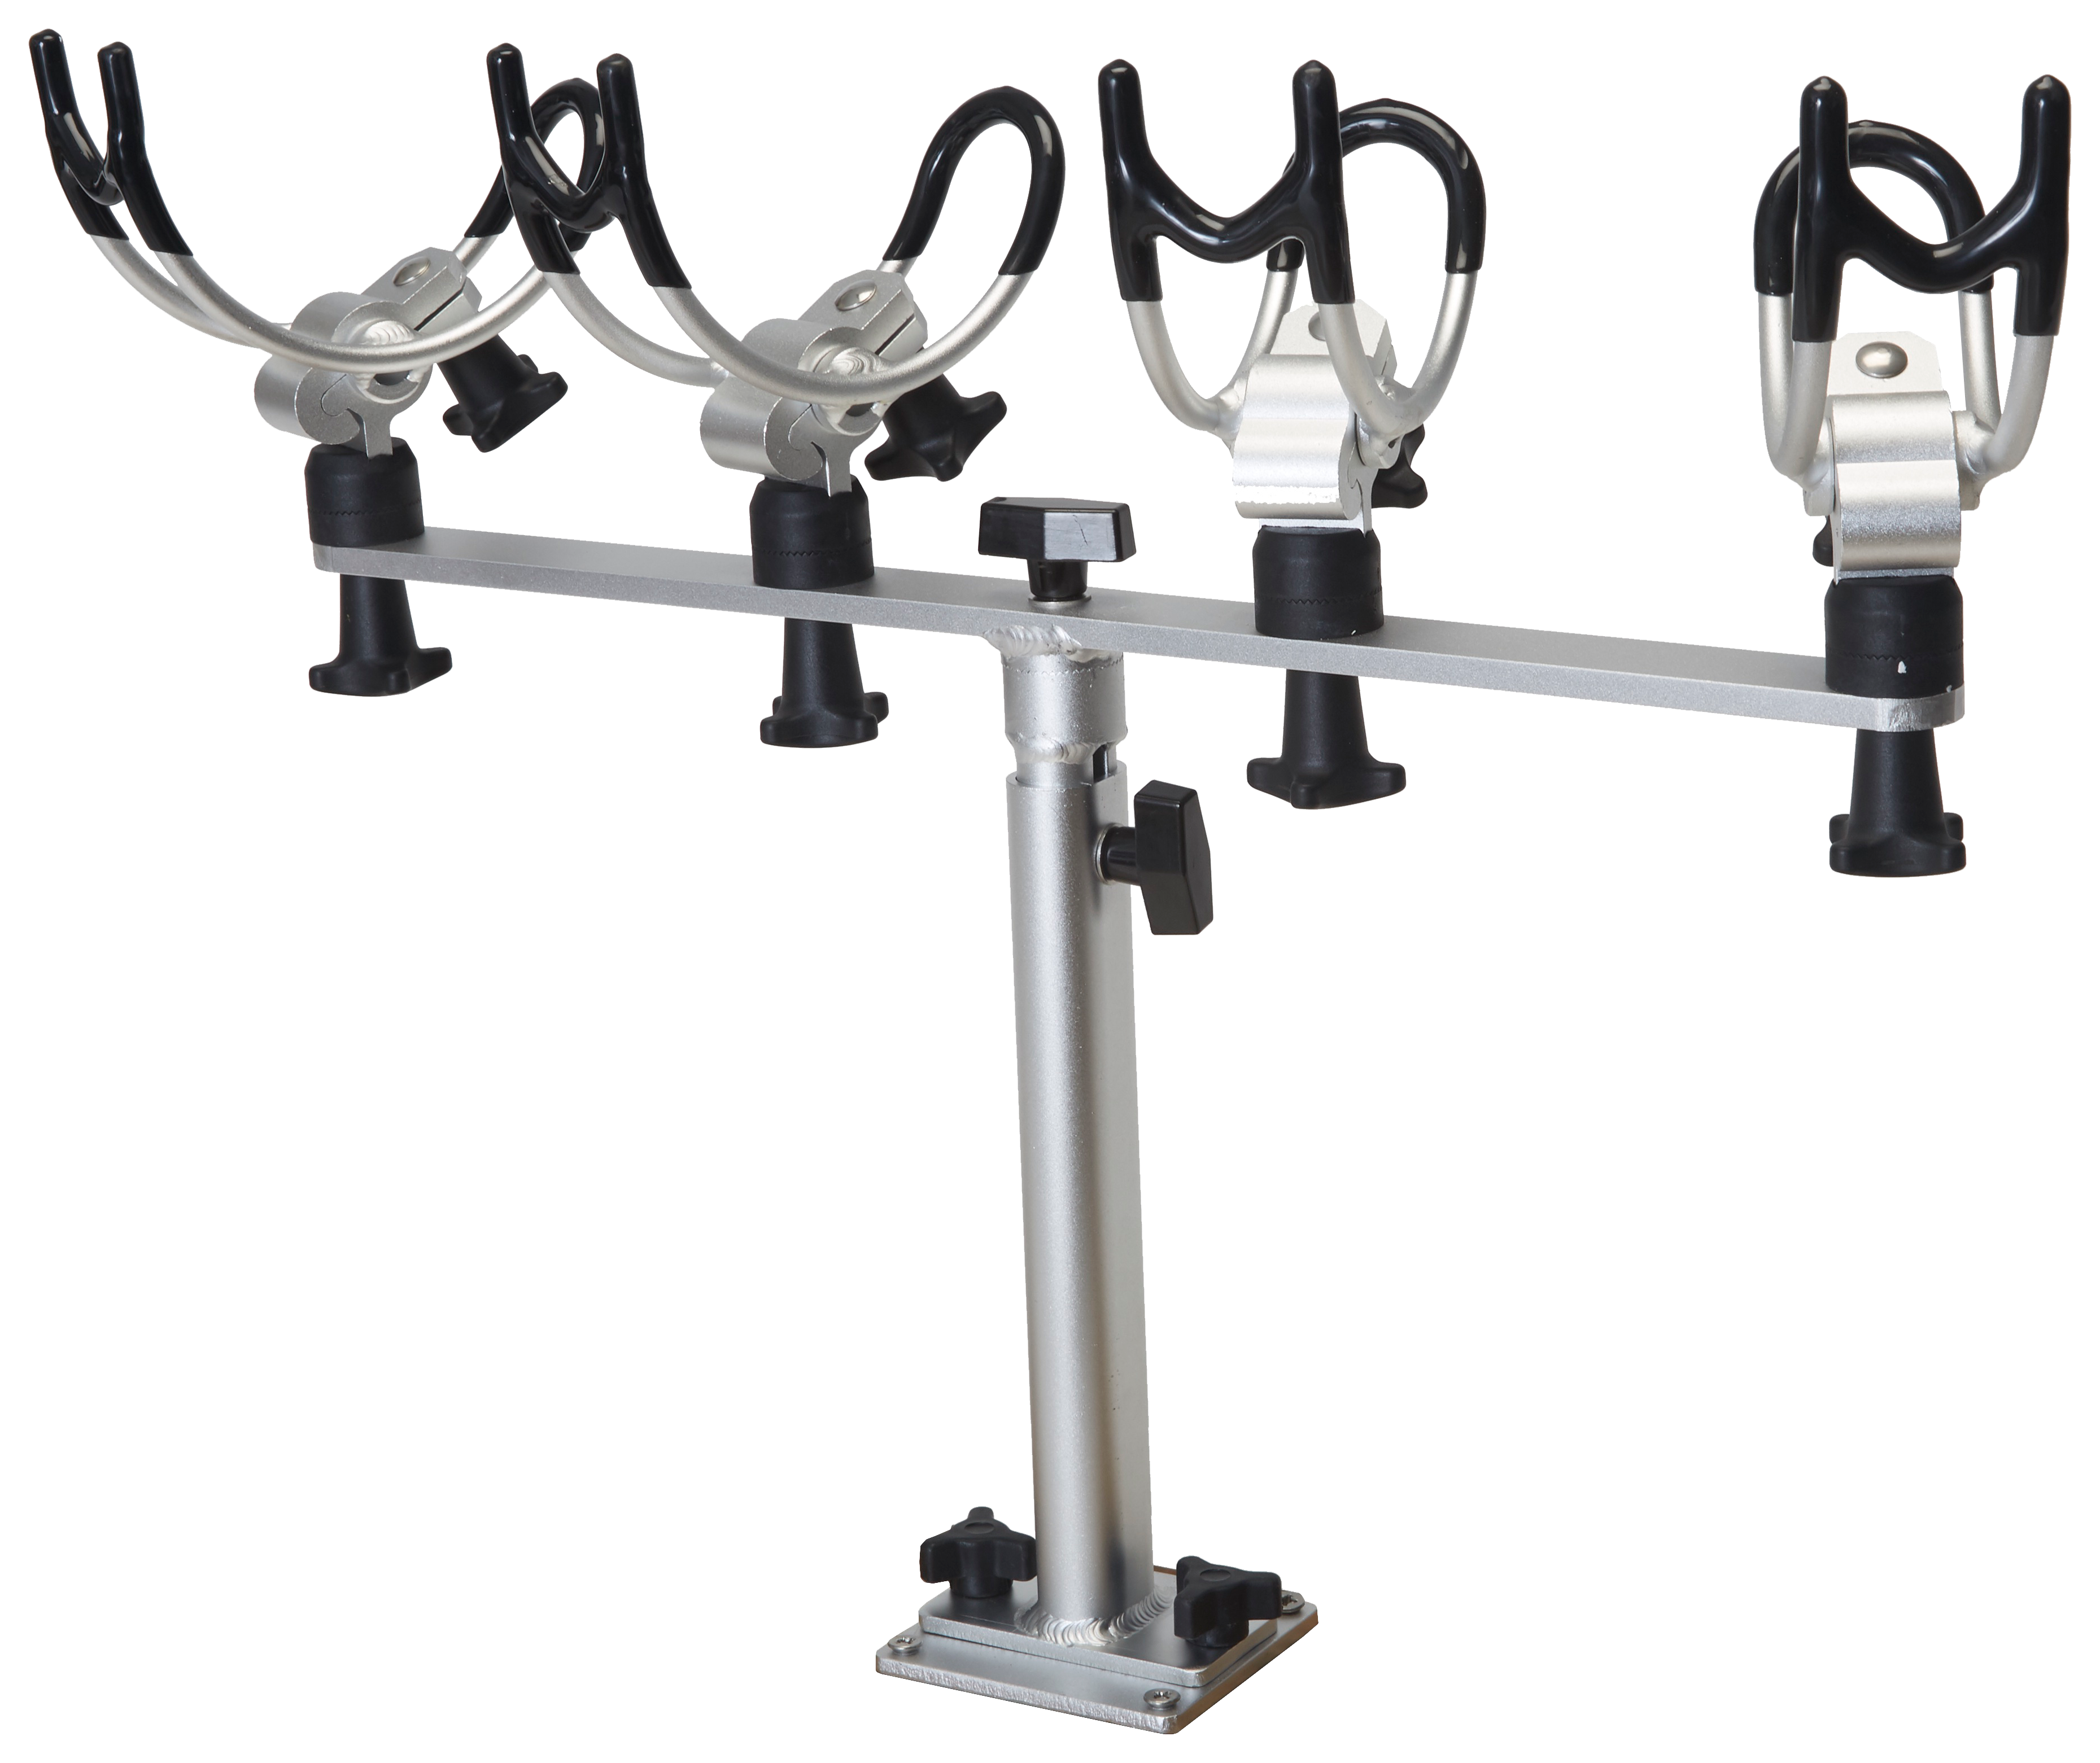 Millennium Outdoors Extra plate fishing rod holder